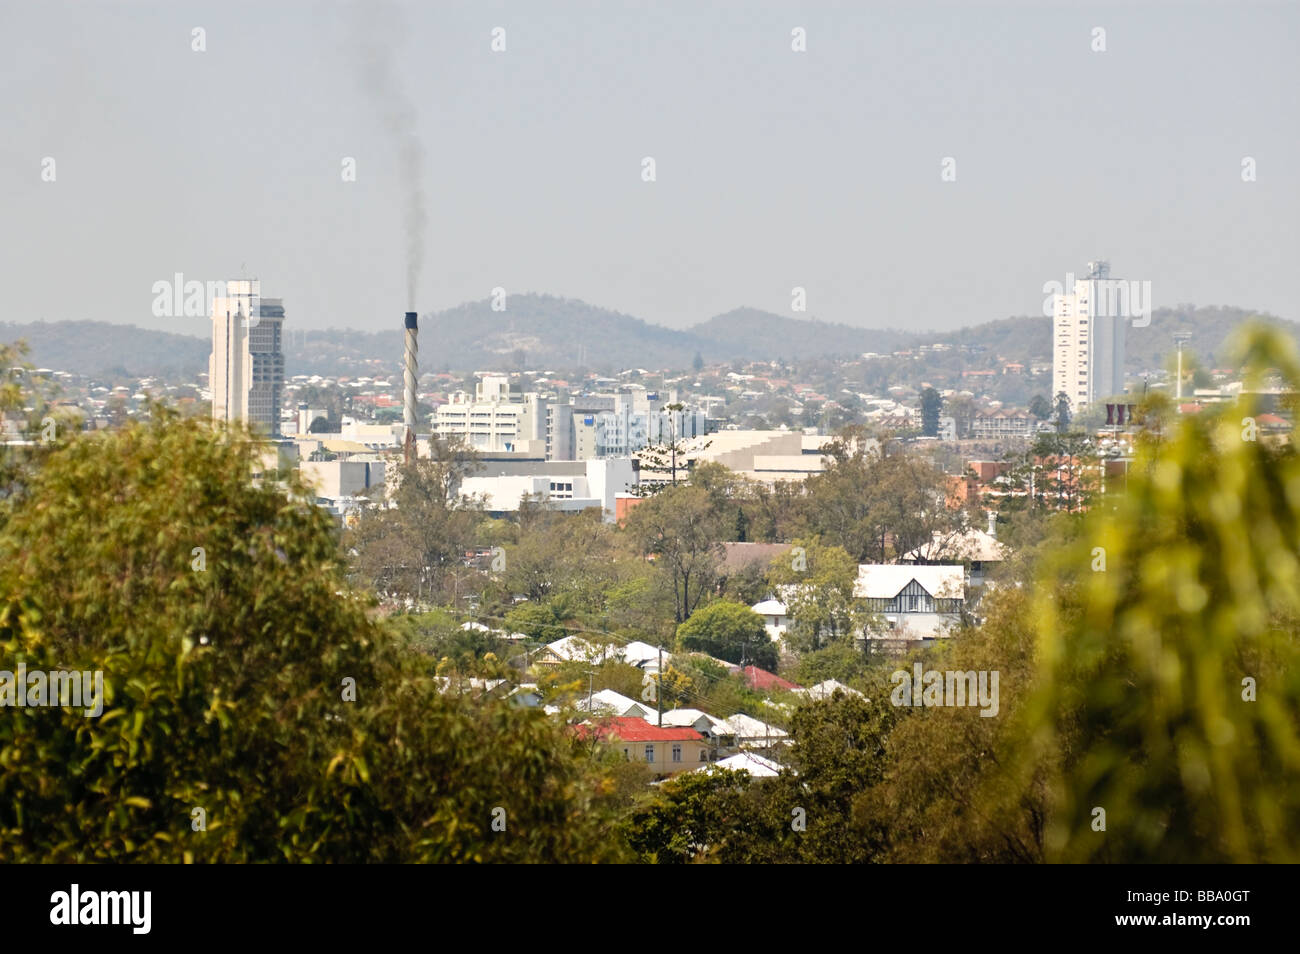 Pollution streams into the sky on a hot, hazy day: cityscape of Brisbane, Queensland, Australia Stock Photo